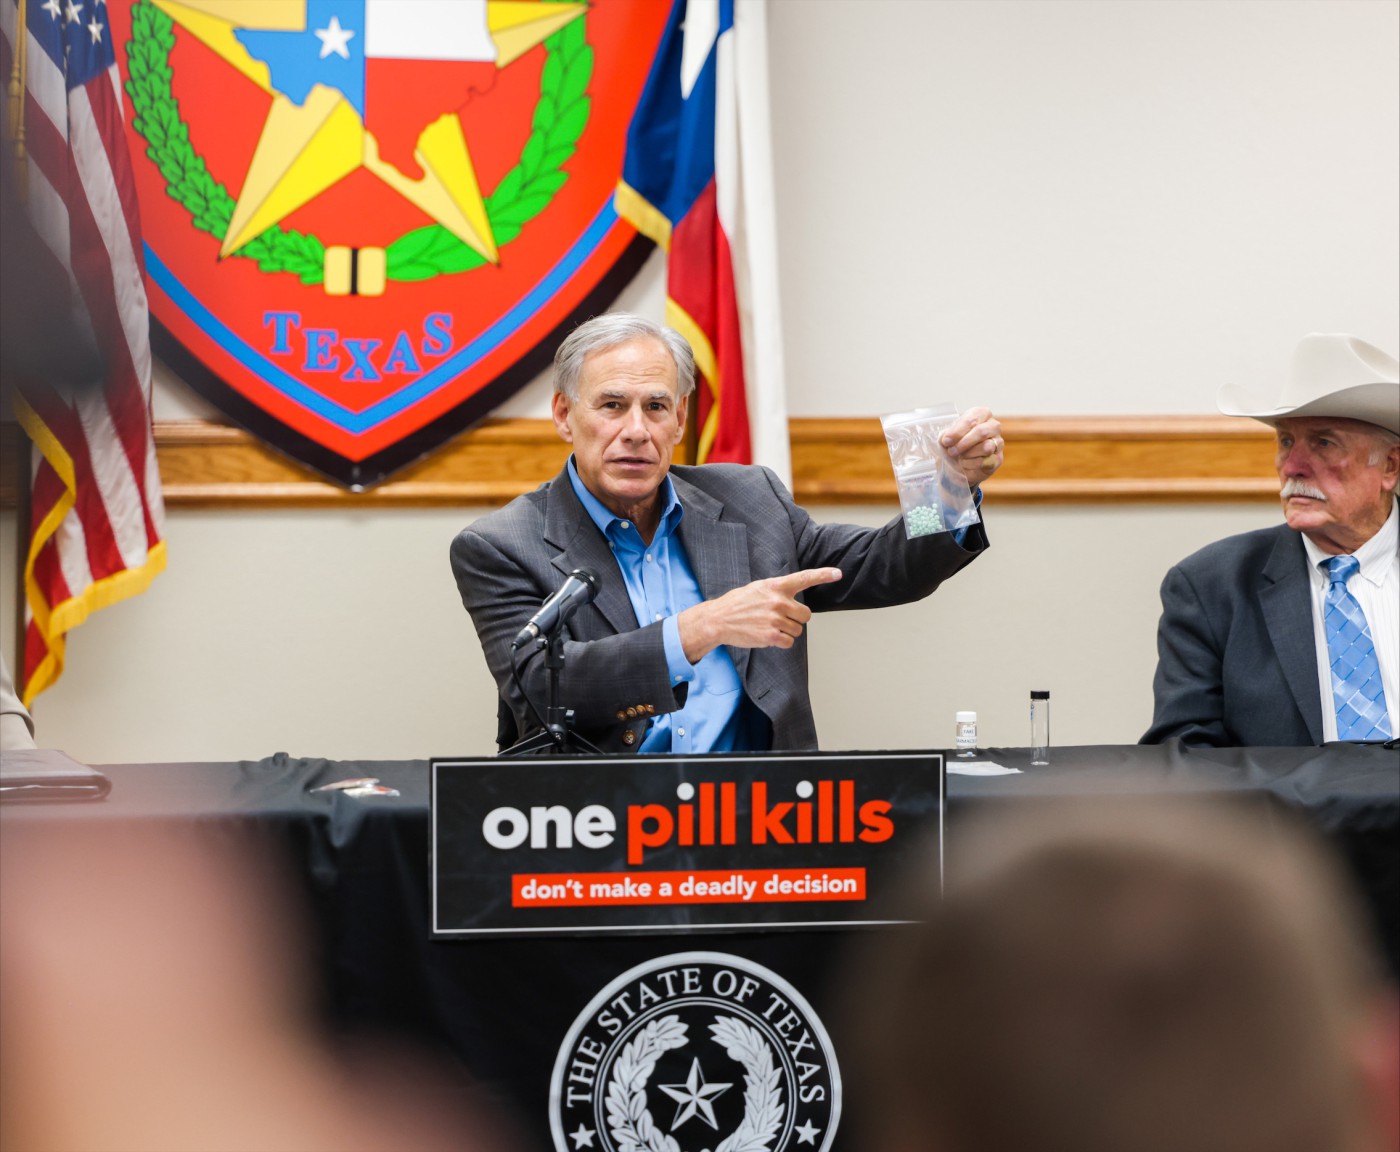 Governor Abbott Highlights Statewide "One Pill Kills" Campaign In Waco